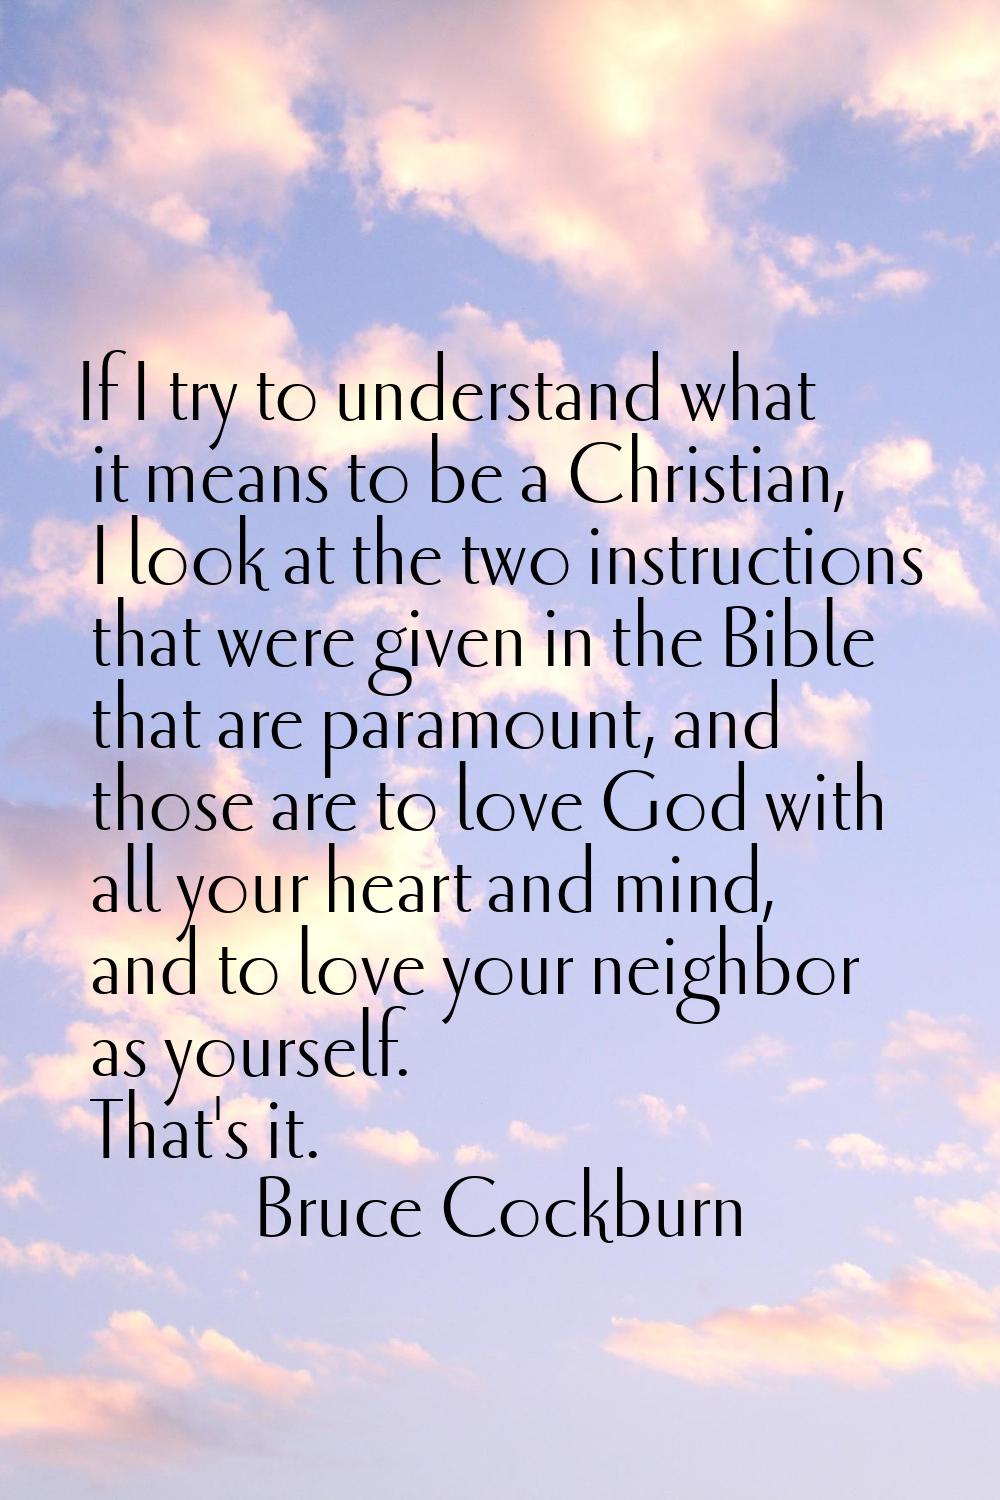 If I try to understand what it means to be a Christian, I look at the two instructions that were gi